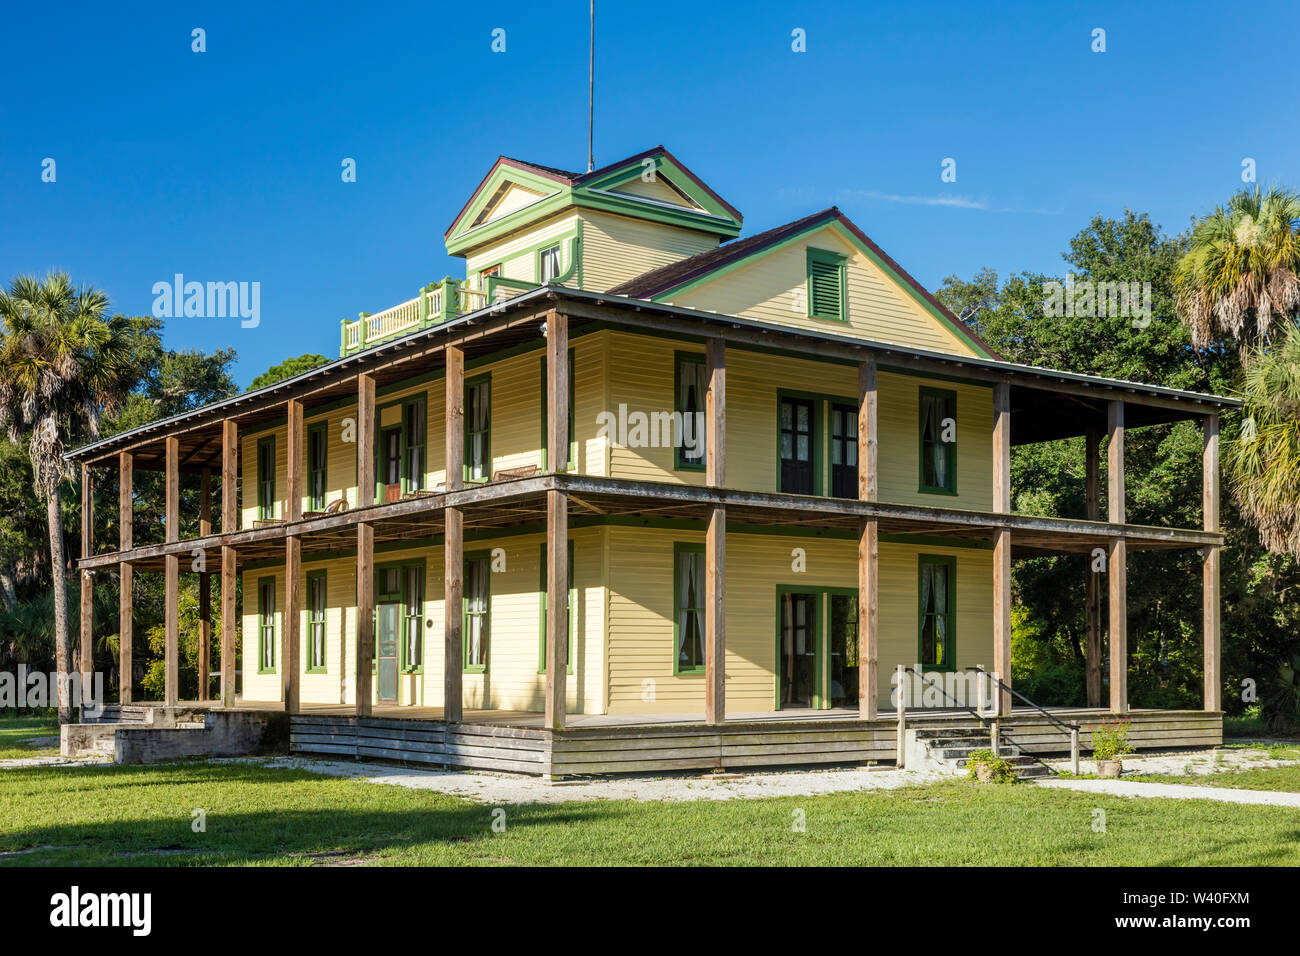 The Planetary Court Building (b. 1904) on the grounds of Koreshan Historic Settlement - a 19th Century Utopian Commune, Estero, Florida, USA Stock Photo